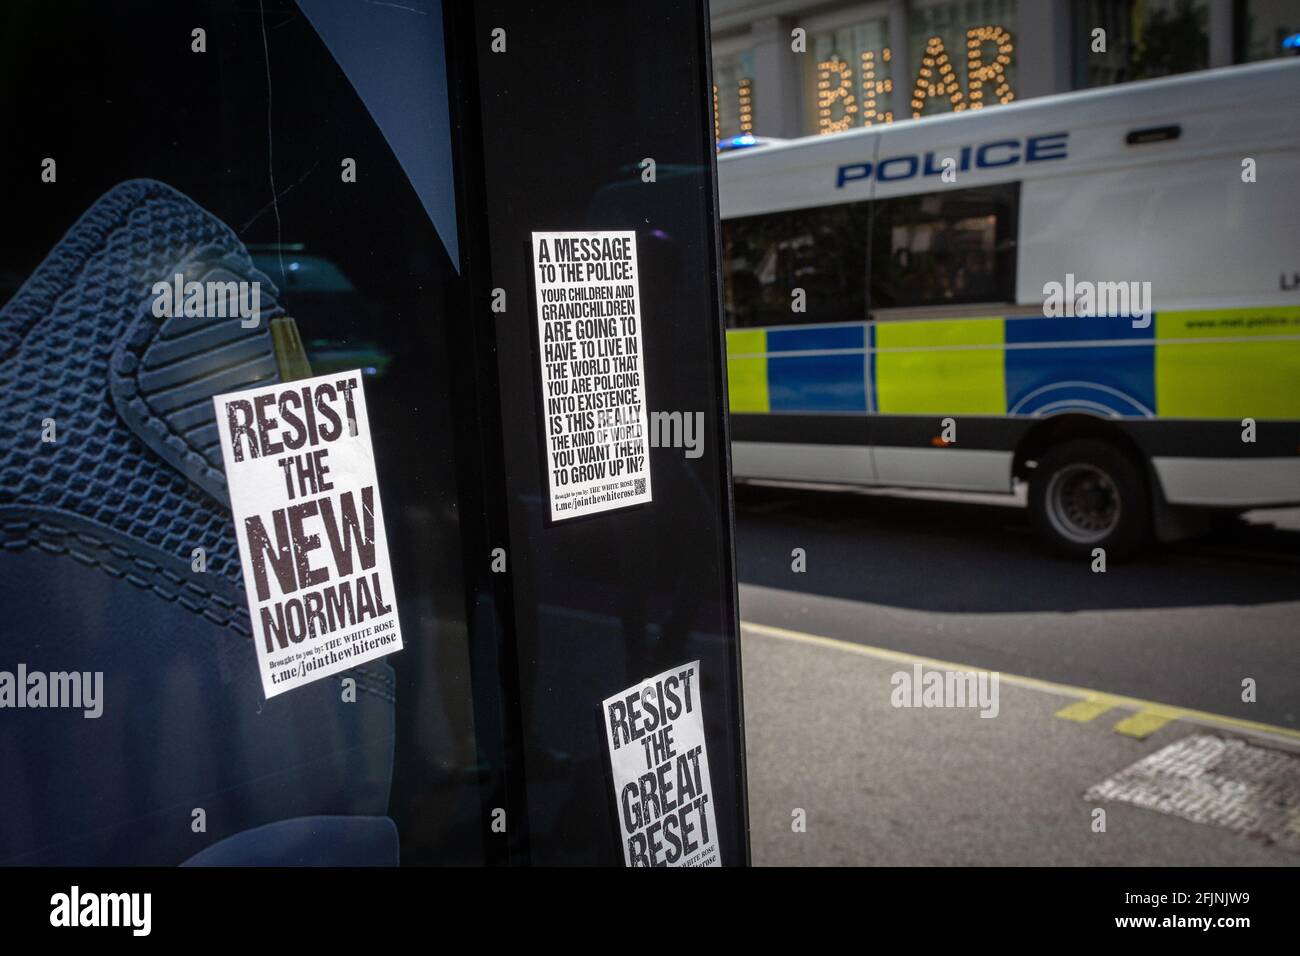 April 24, 2021, London, England, United Kingdom:  Busstop with stickers and police van passing during an anti-lockdown protest in London , UK. Stock Photo